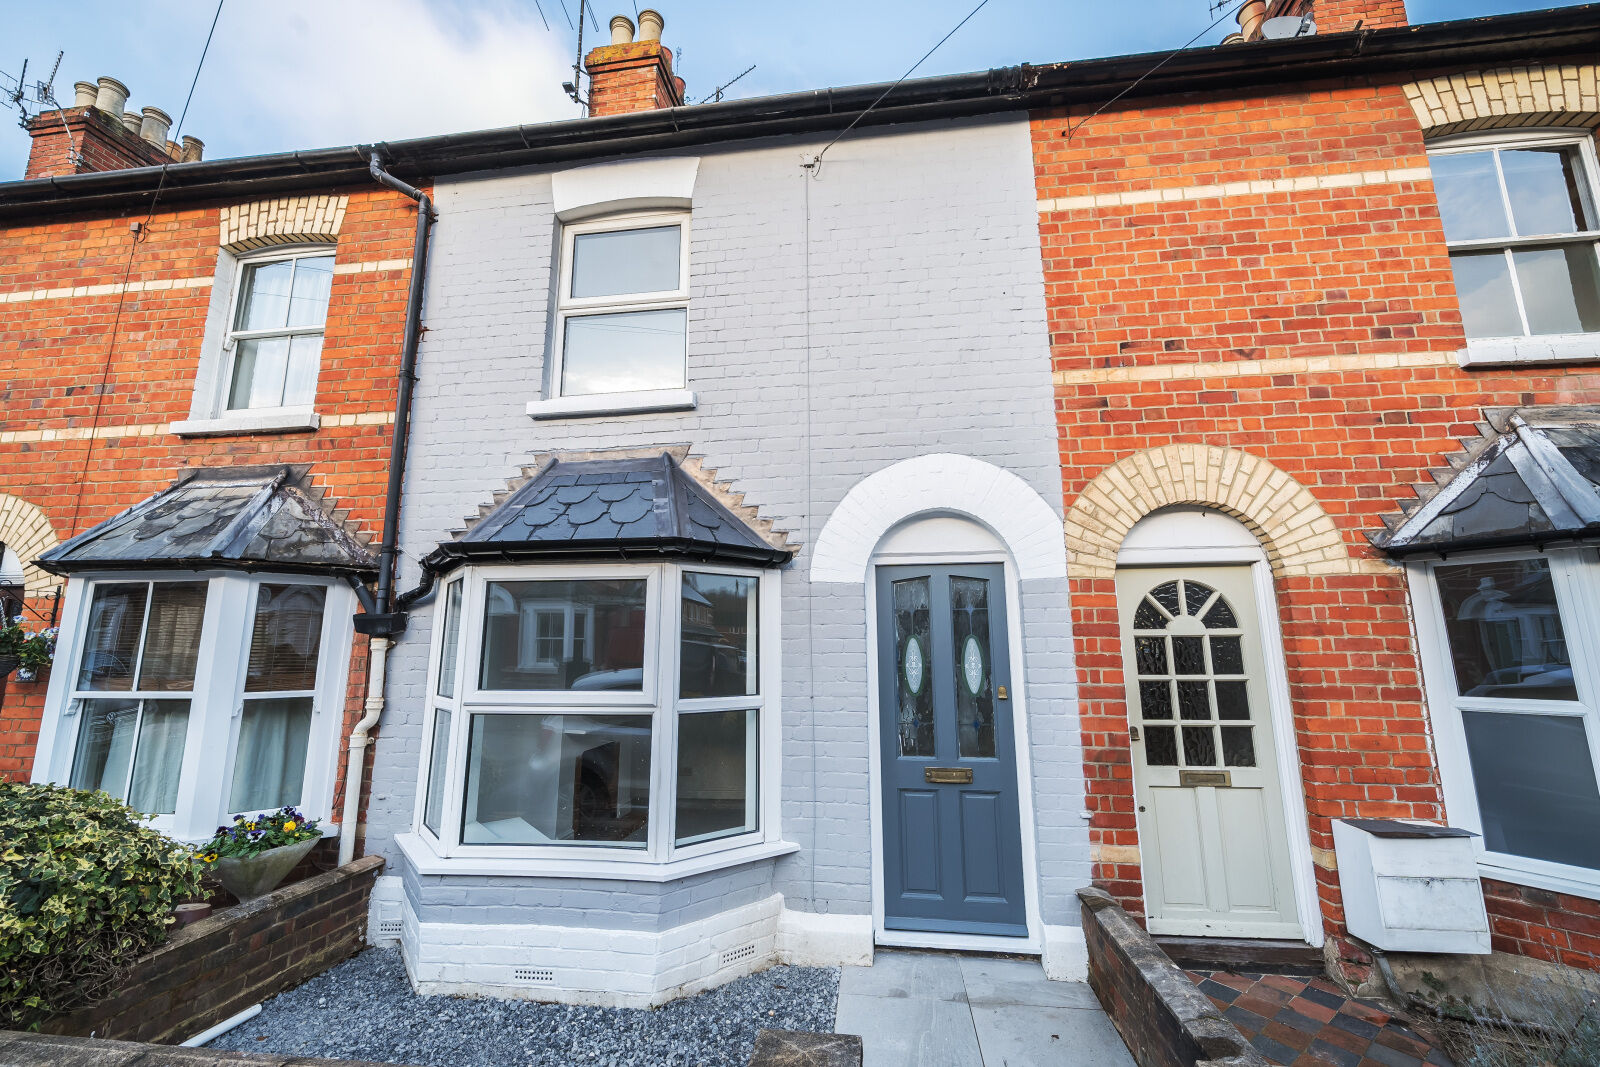 3 bedroom mid terraced house for sale Park Road, Henley-on-Thames, RG9, main image